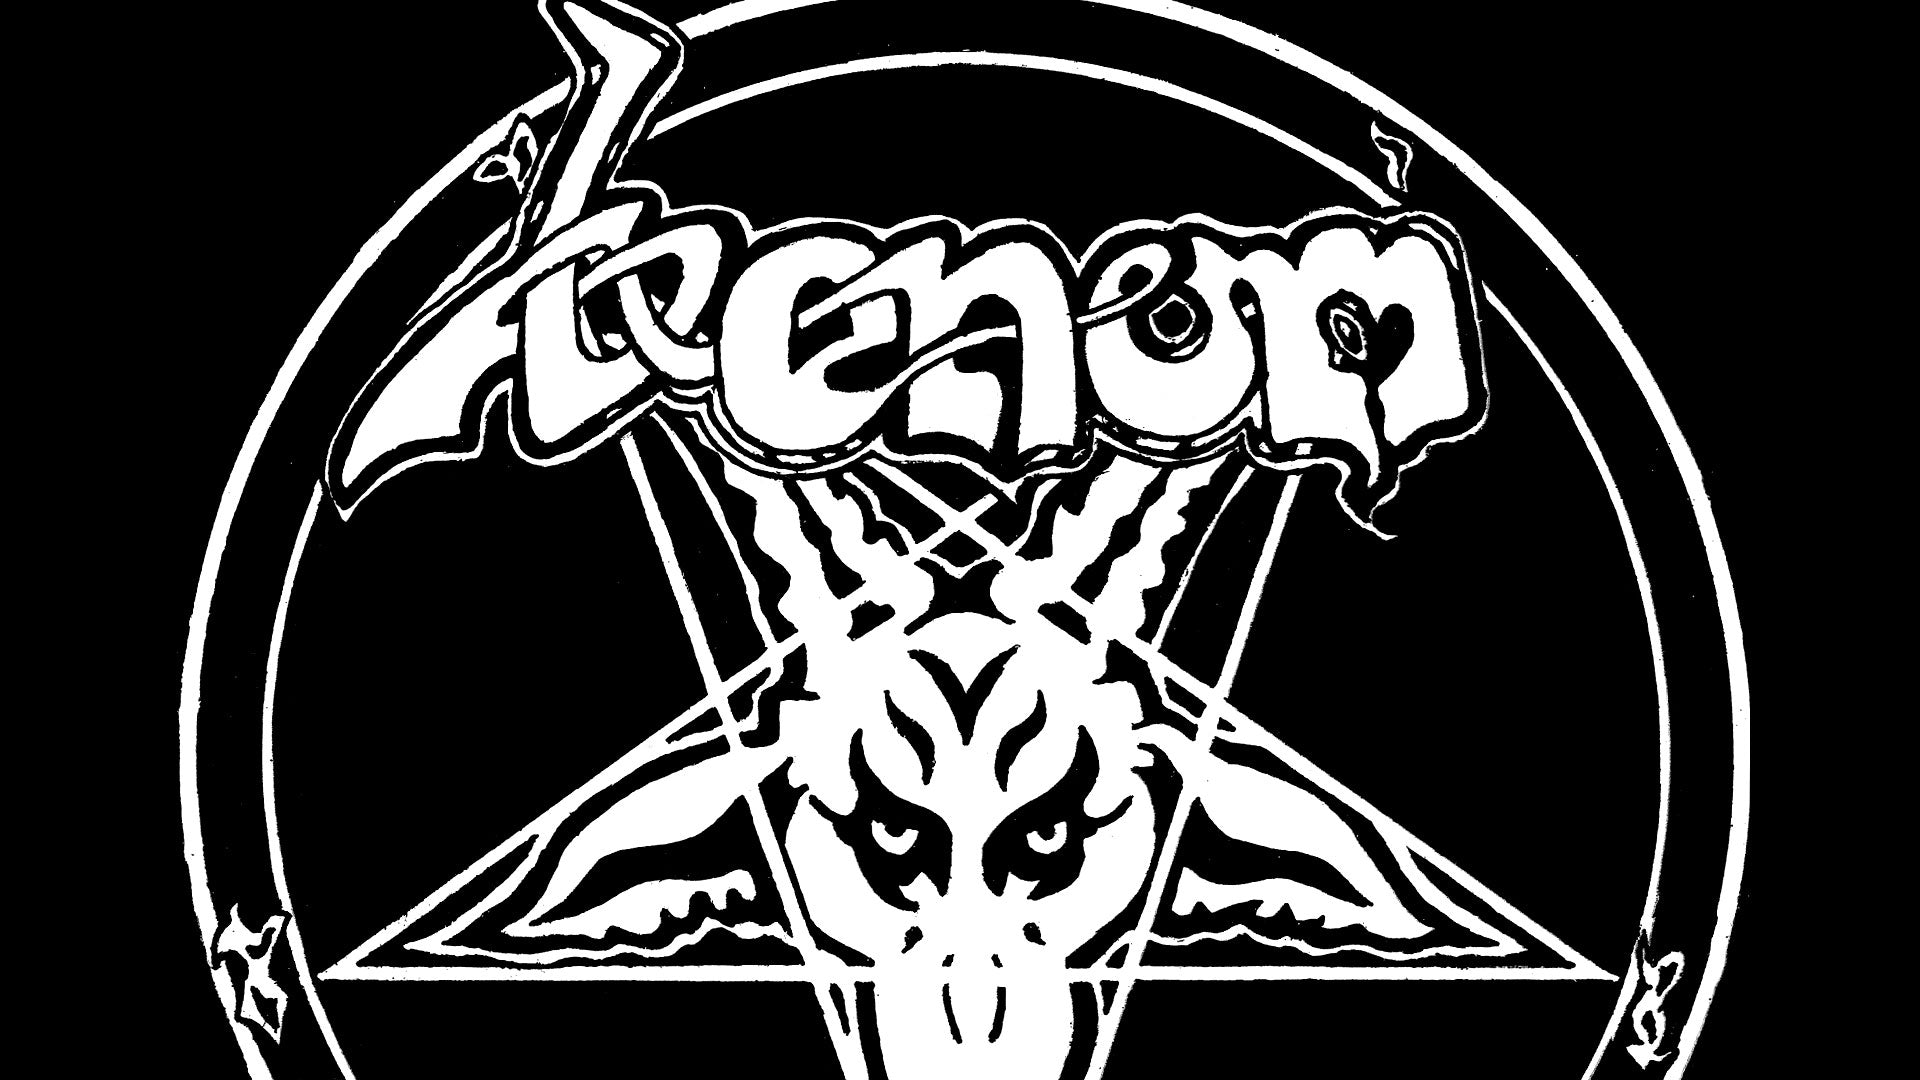 37 Years Ago: VENOM release In League with Satan